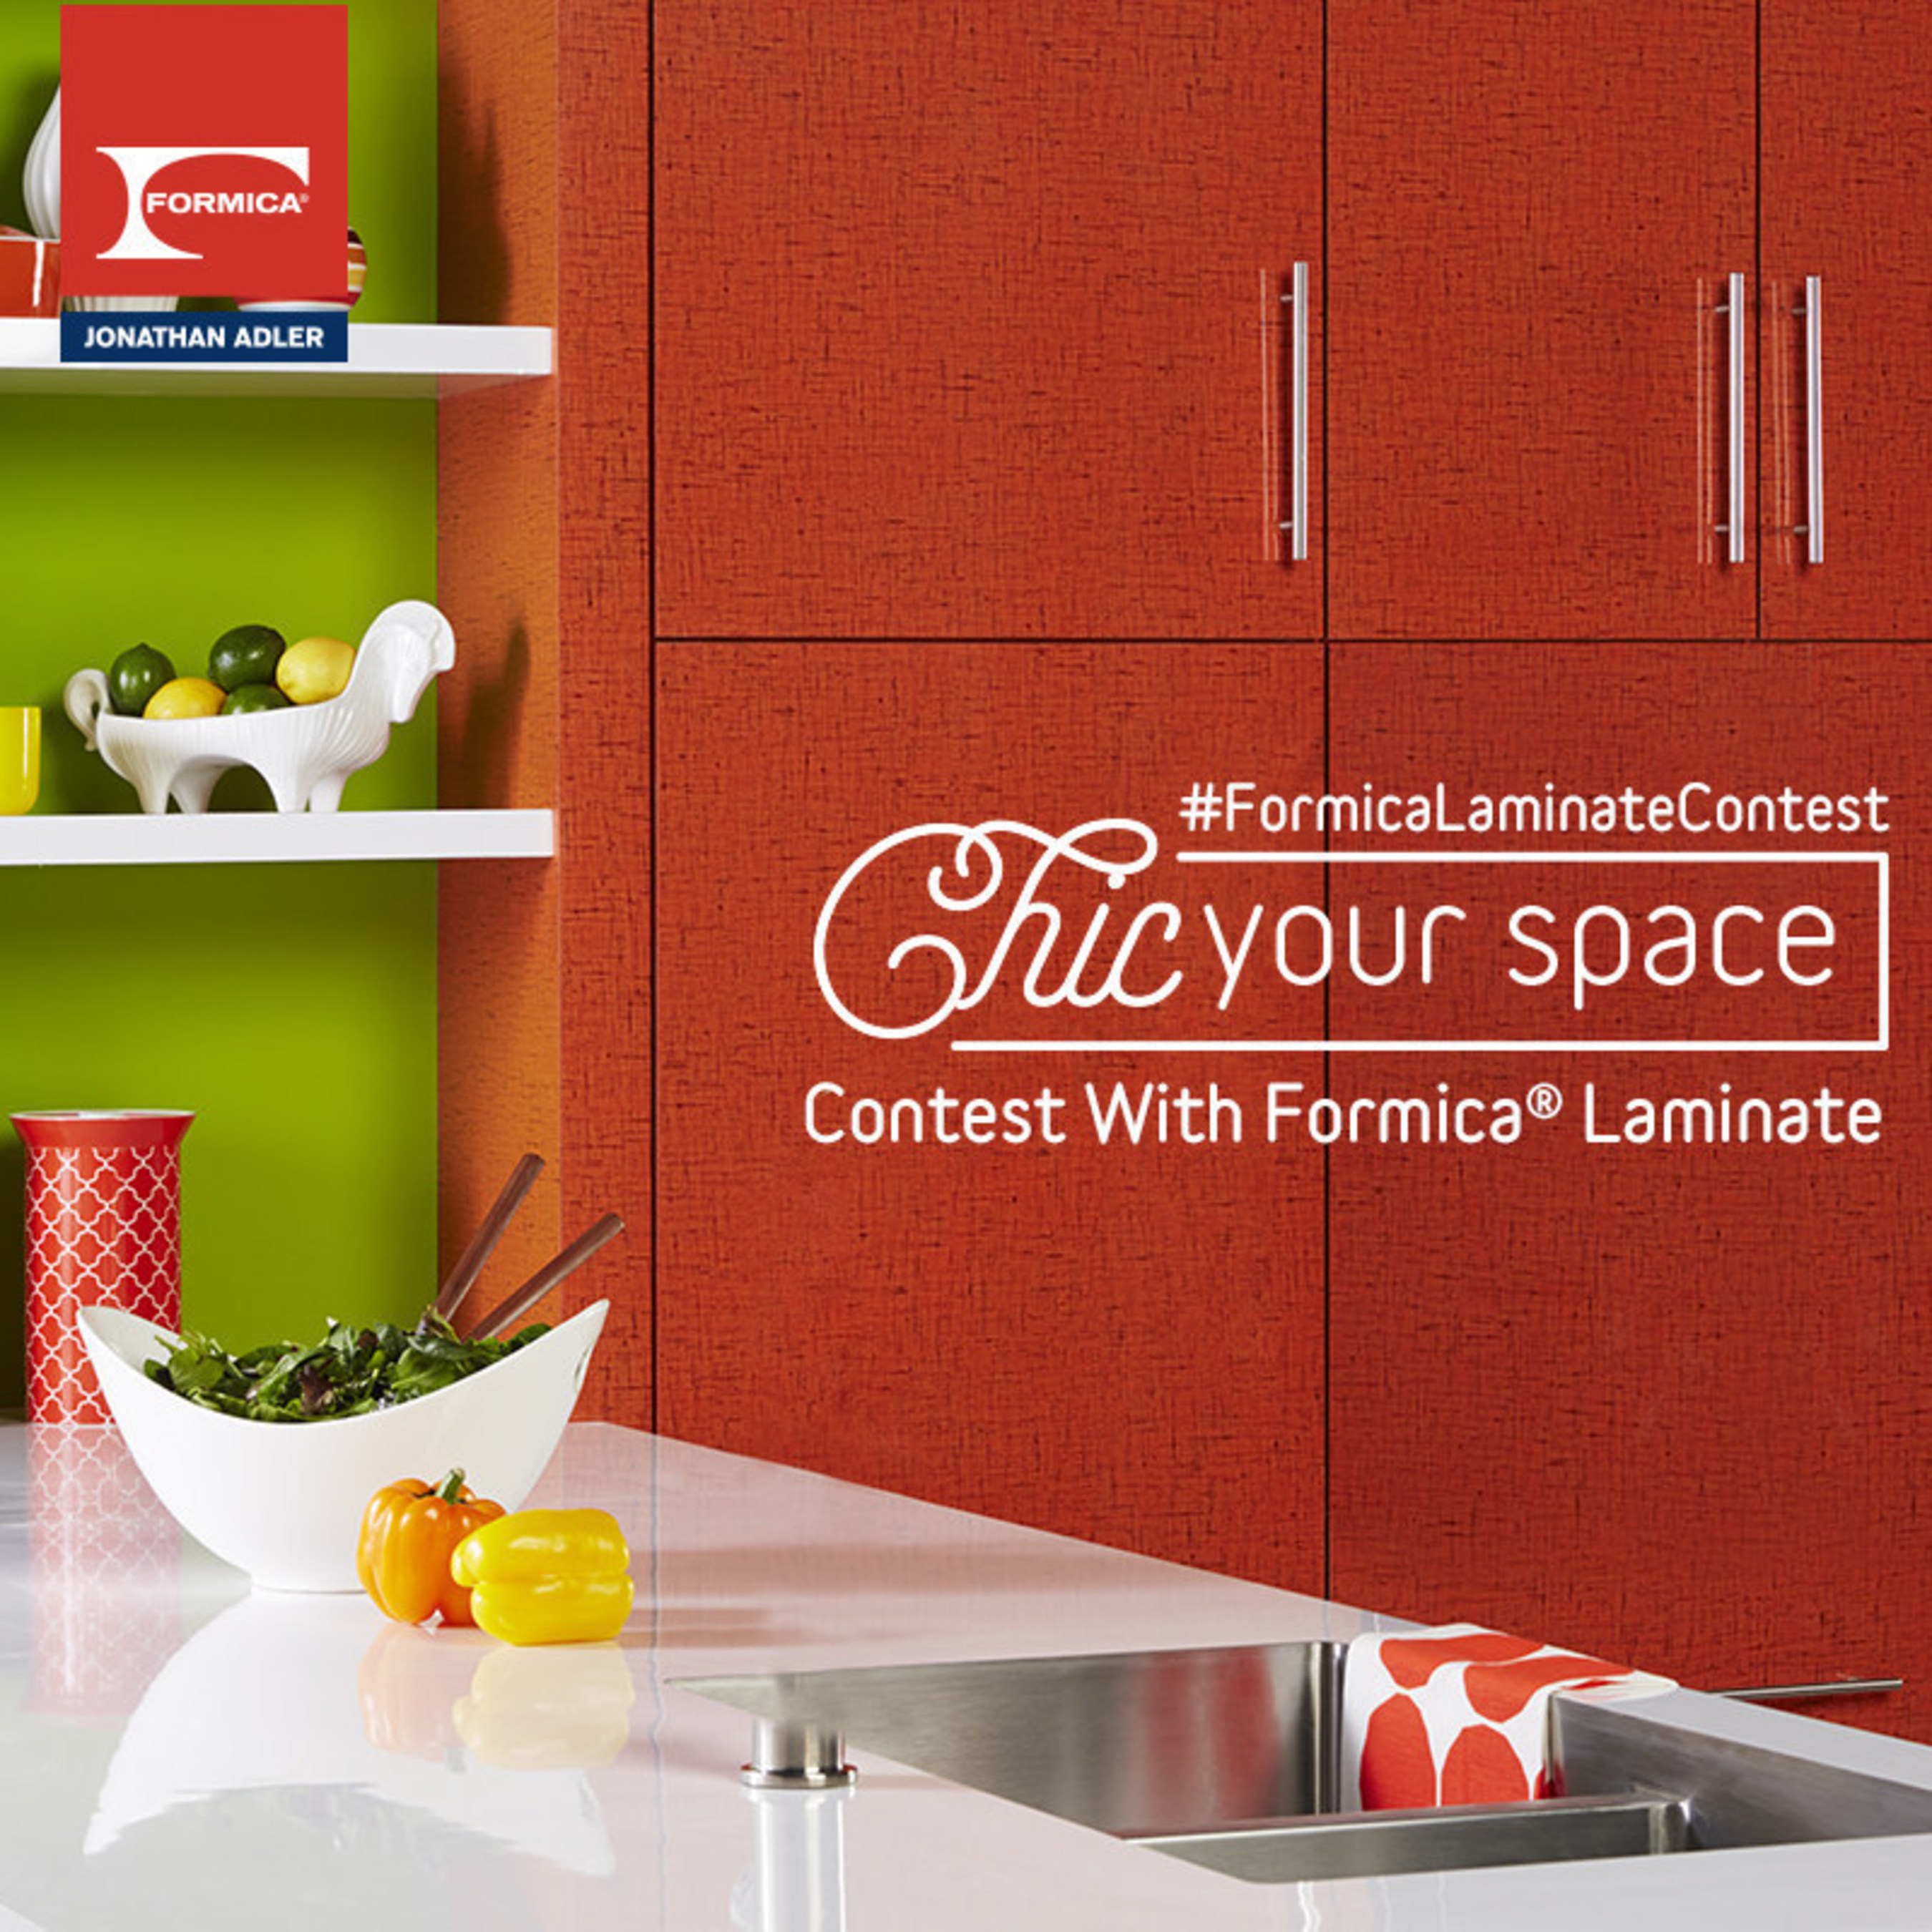 Formica Corporation gives homeowners a chance to win a $10,000 room makeover with the Chic Your Space Contest With Formica(R) Laminate. To enter, users must simply share a photo of the space they want to "chic" using the hashtag #FormicaLaminateContest on Twitter or Instagram, or by direct upload to the contest page at Facebook.com/FormicaGroup. After confirming their entry, users will be entered into the contest.